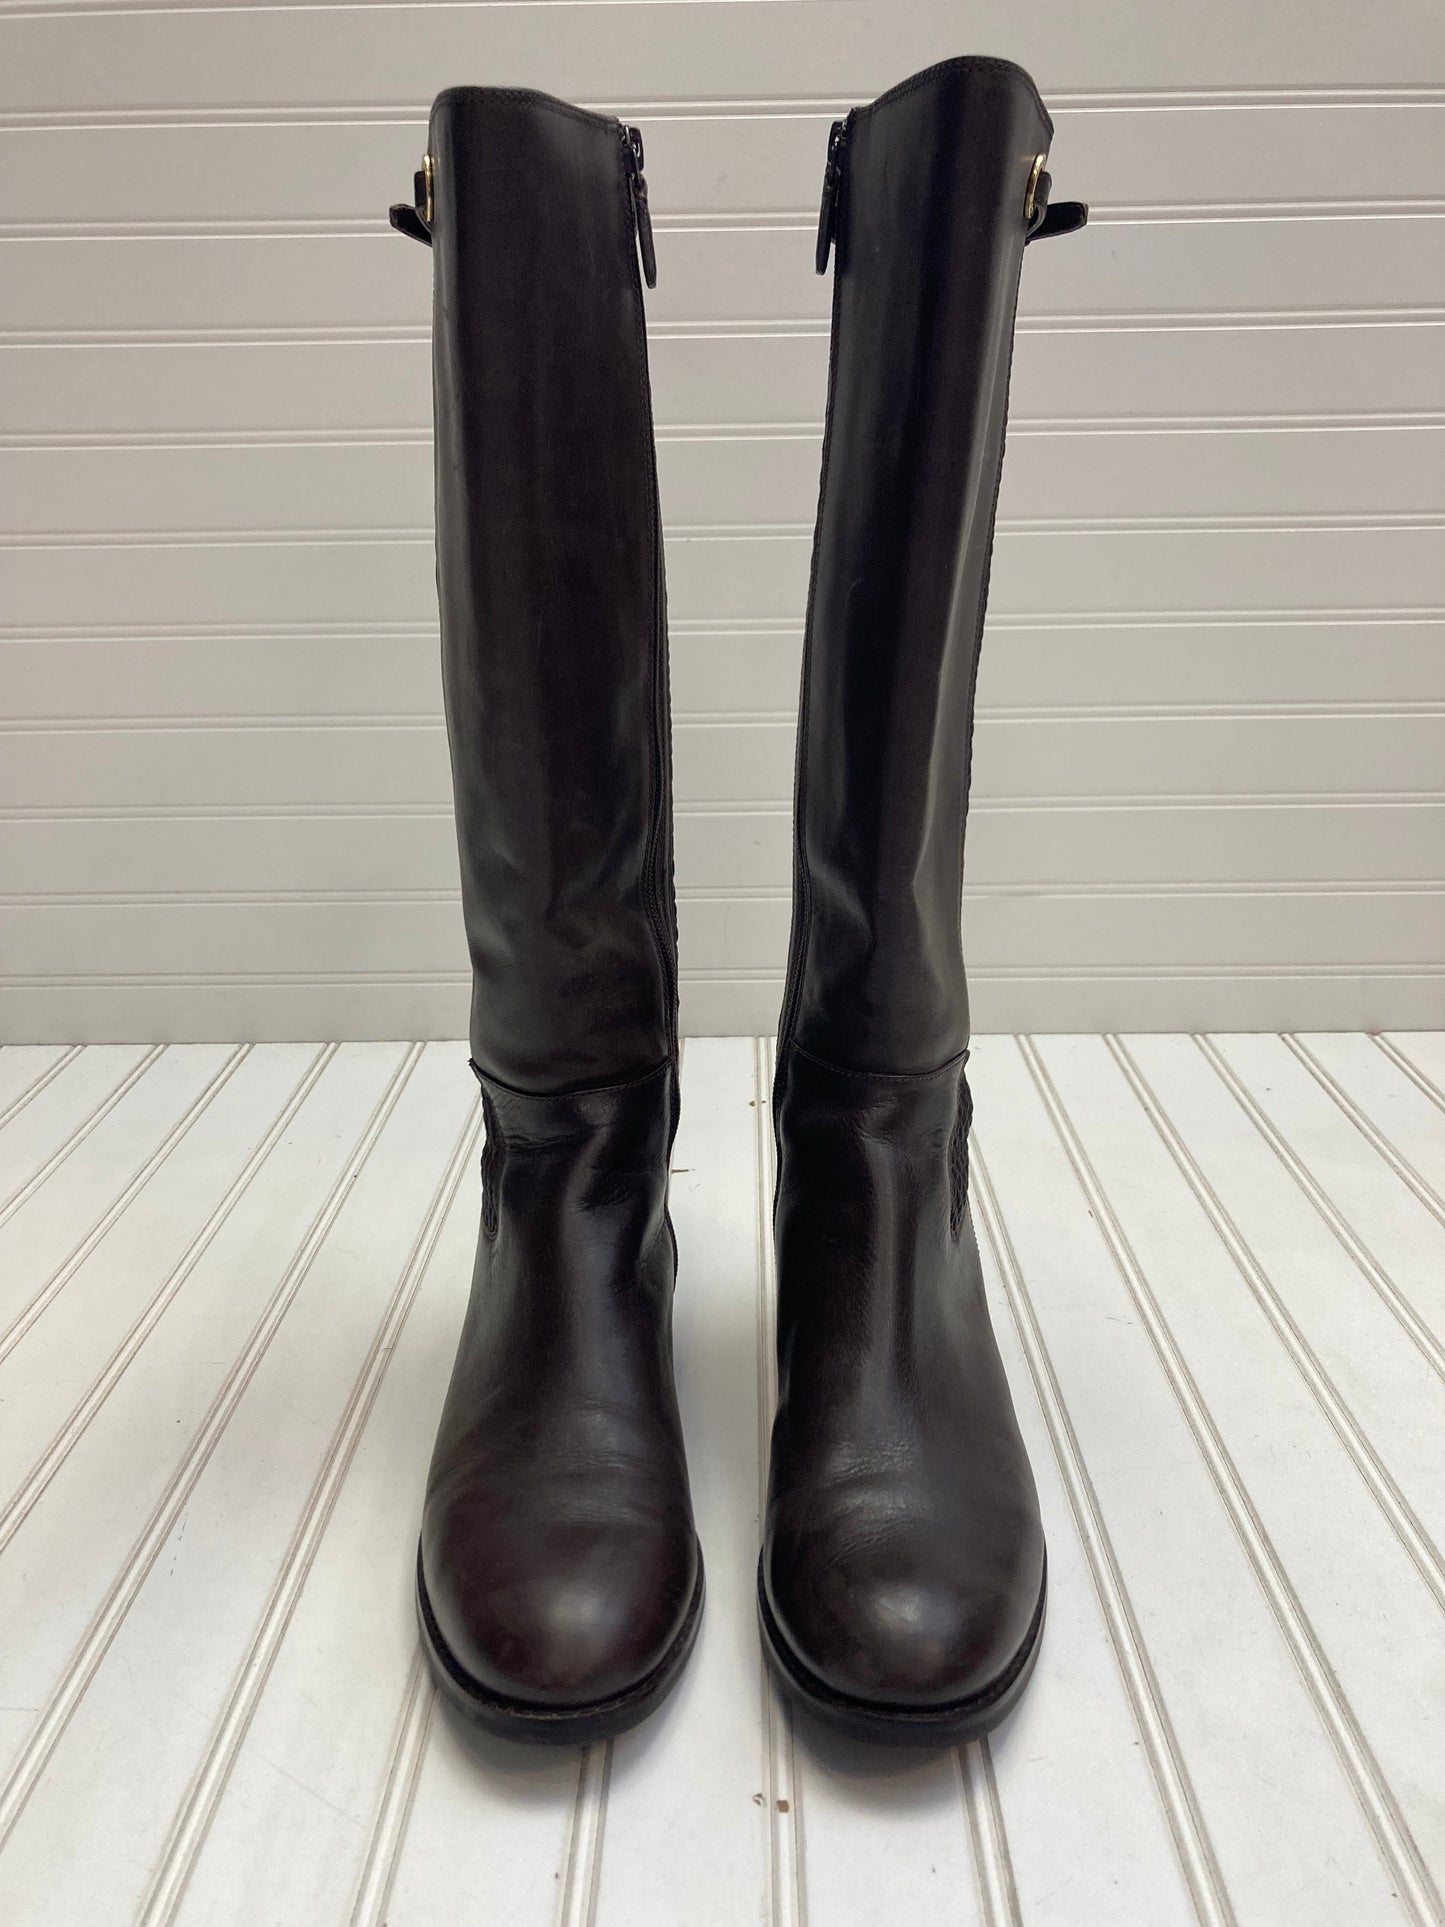 Boots Designer By Cole-haan  Size: 8.5